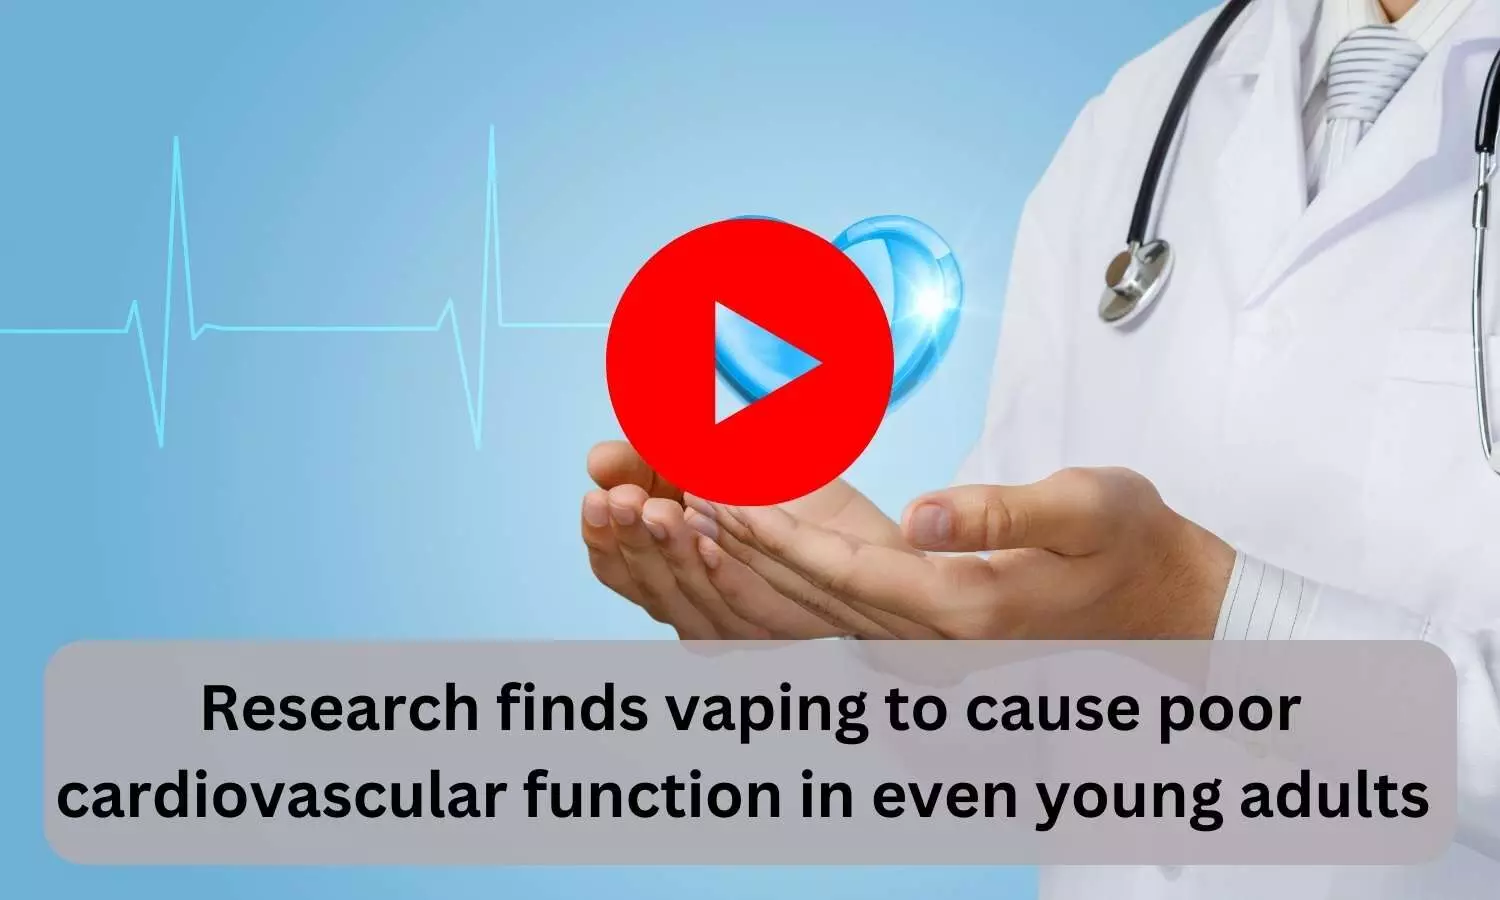 Research finds vaping to cause poor cardiovascular function in even young adults